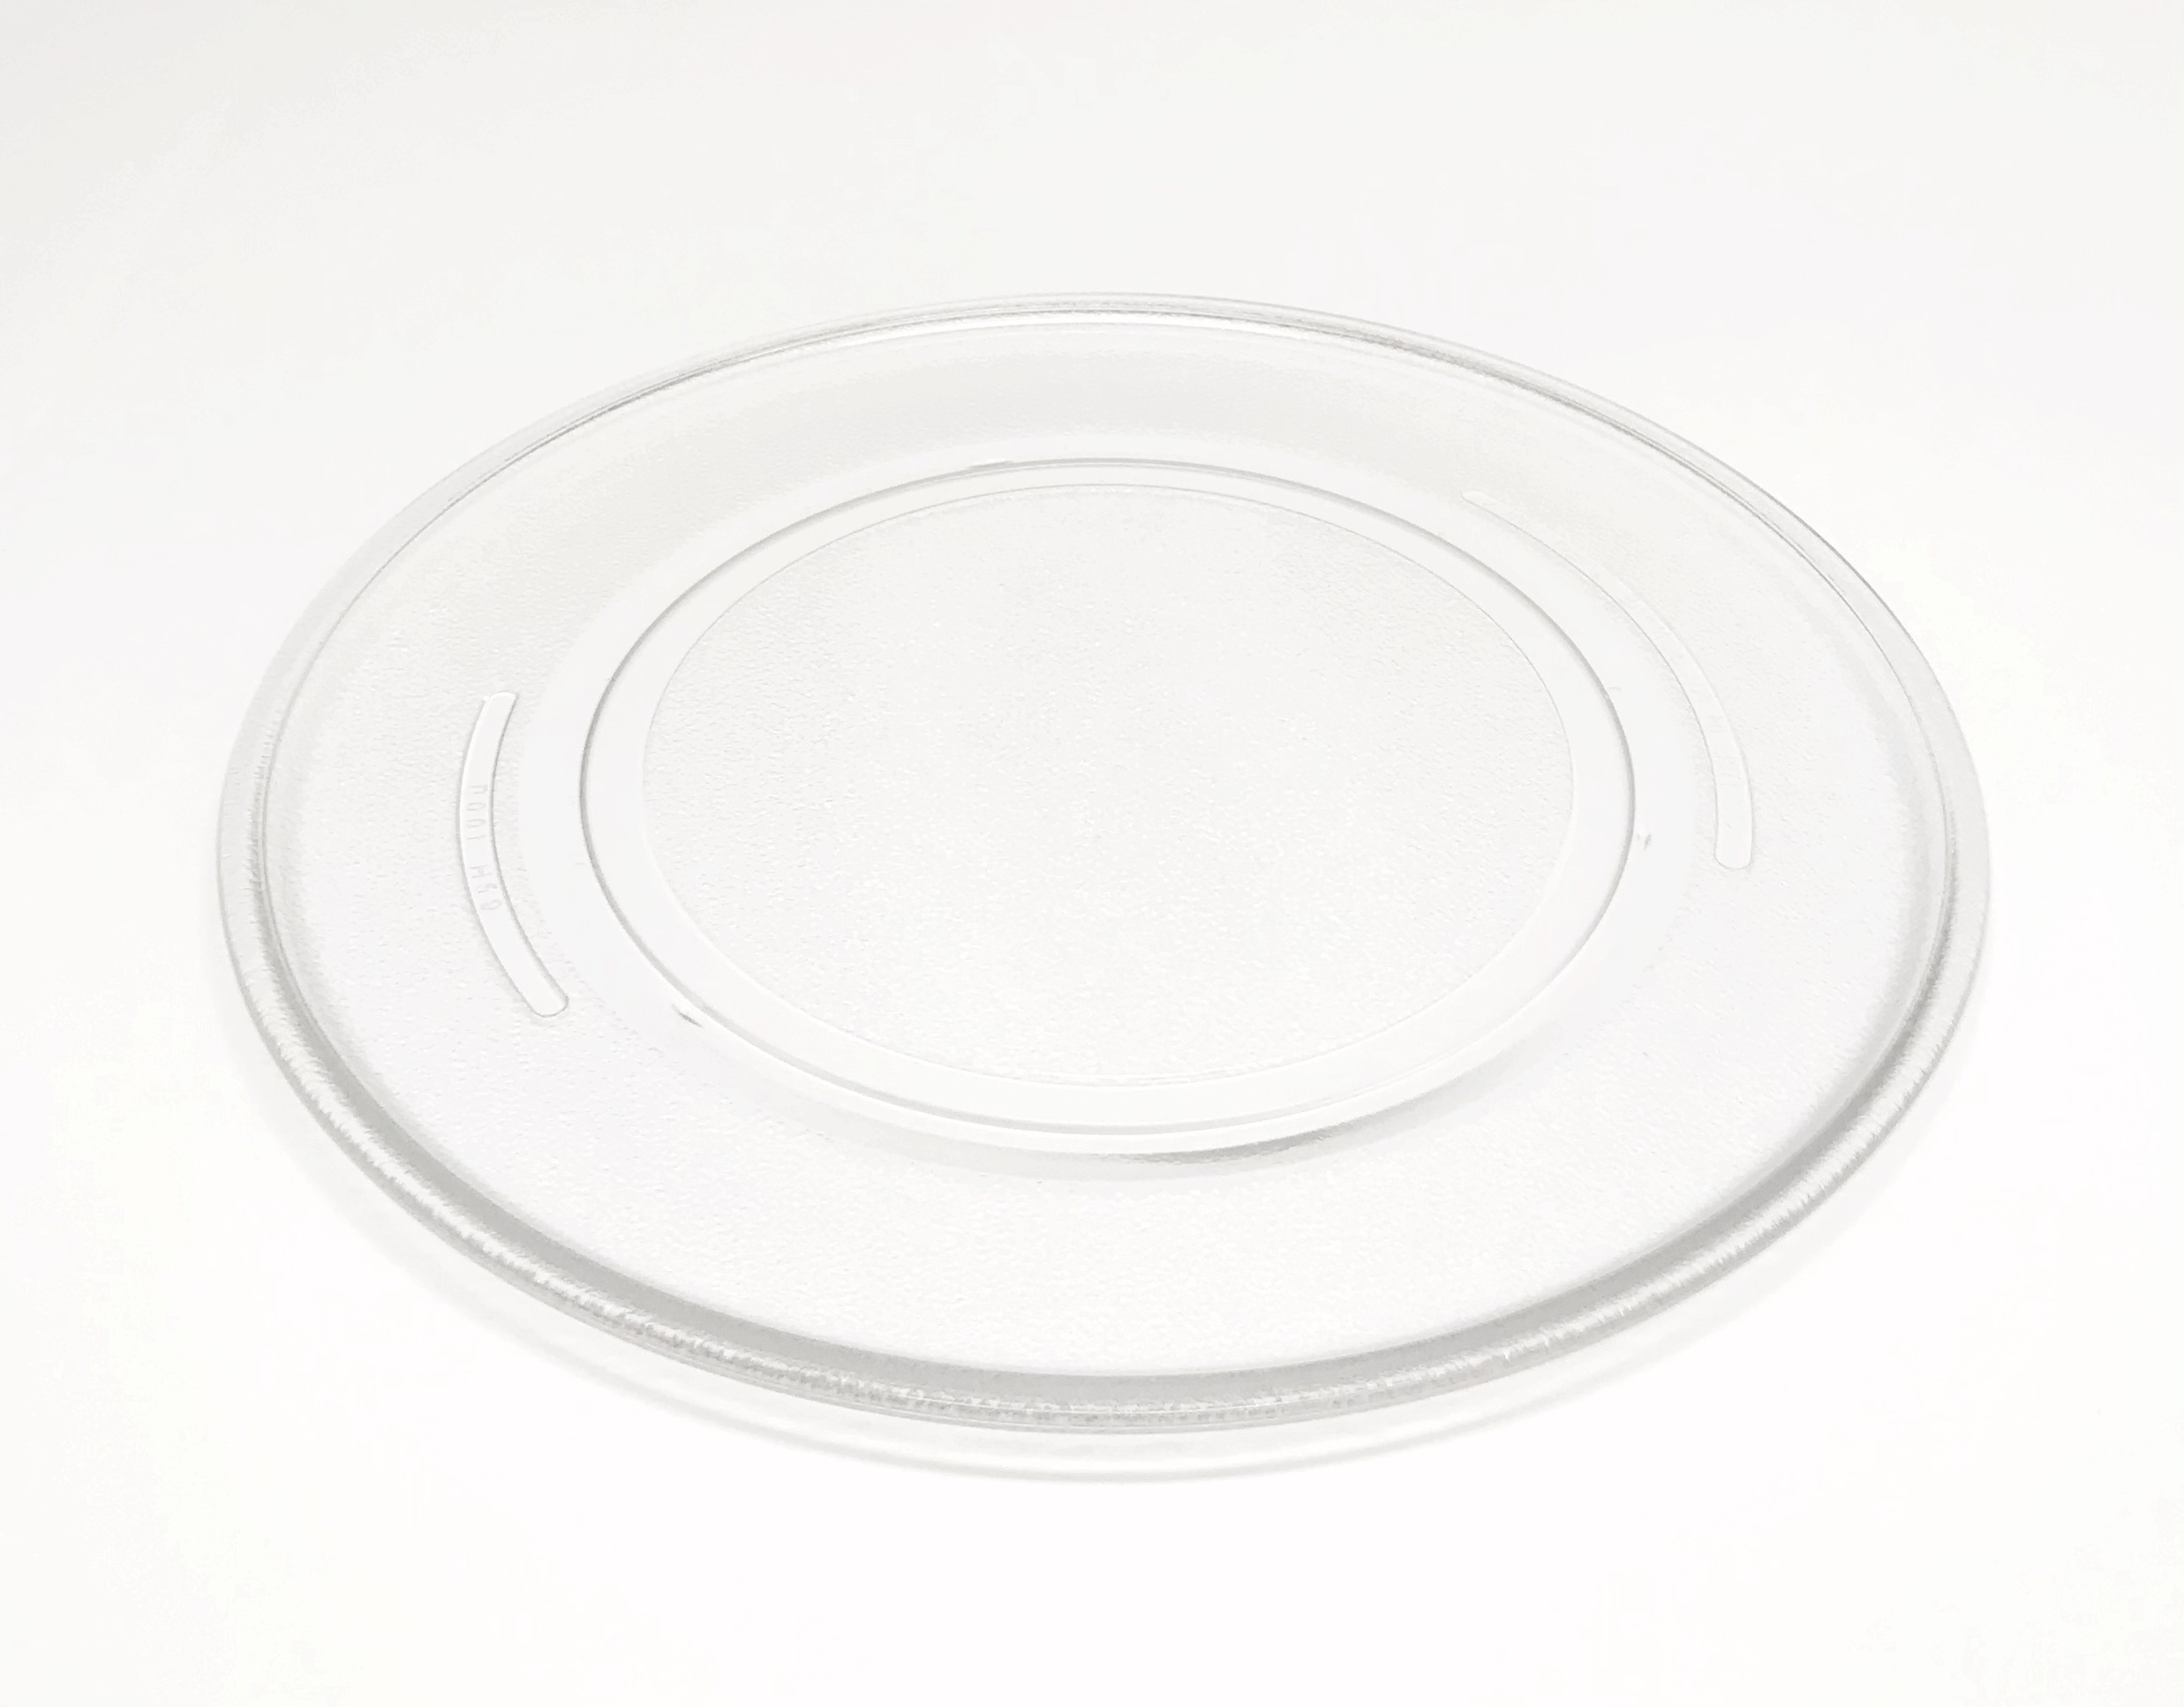 Sharp OEM Sharp Microwave Turntable Glass Tray Plate Shipped With R5W34, R-5W34